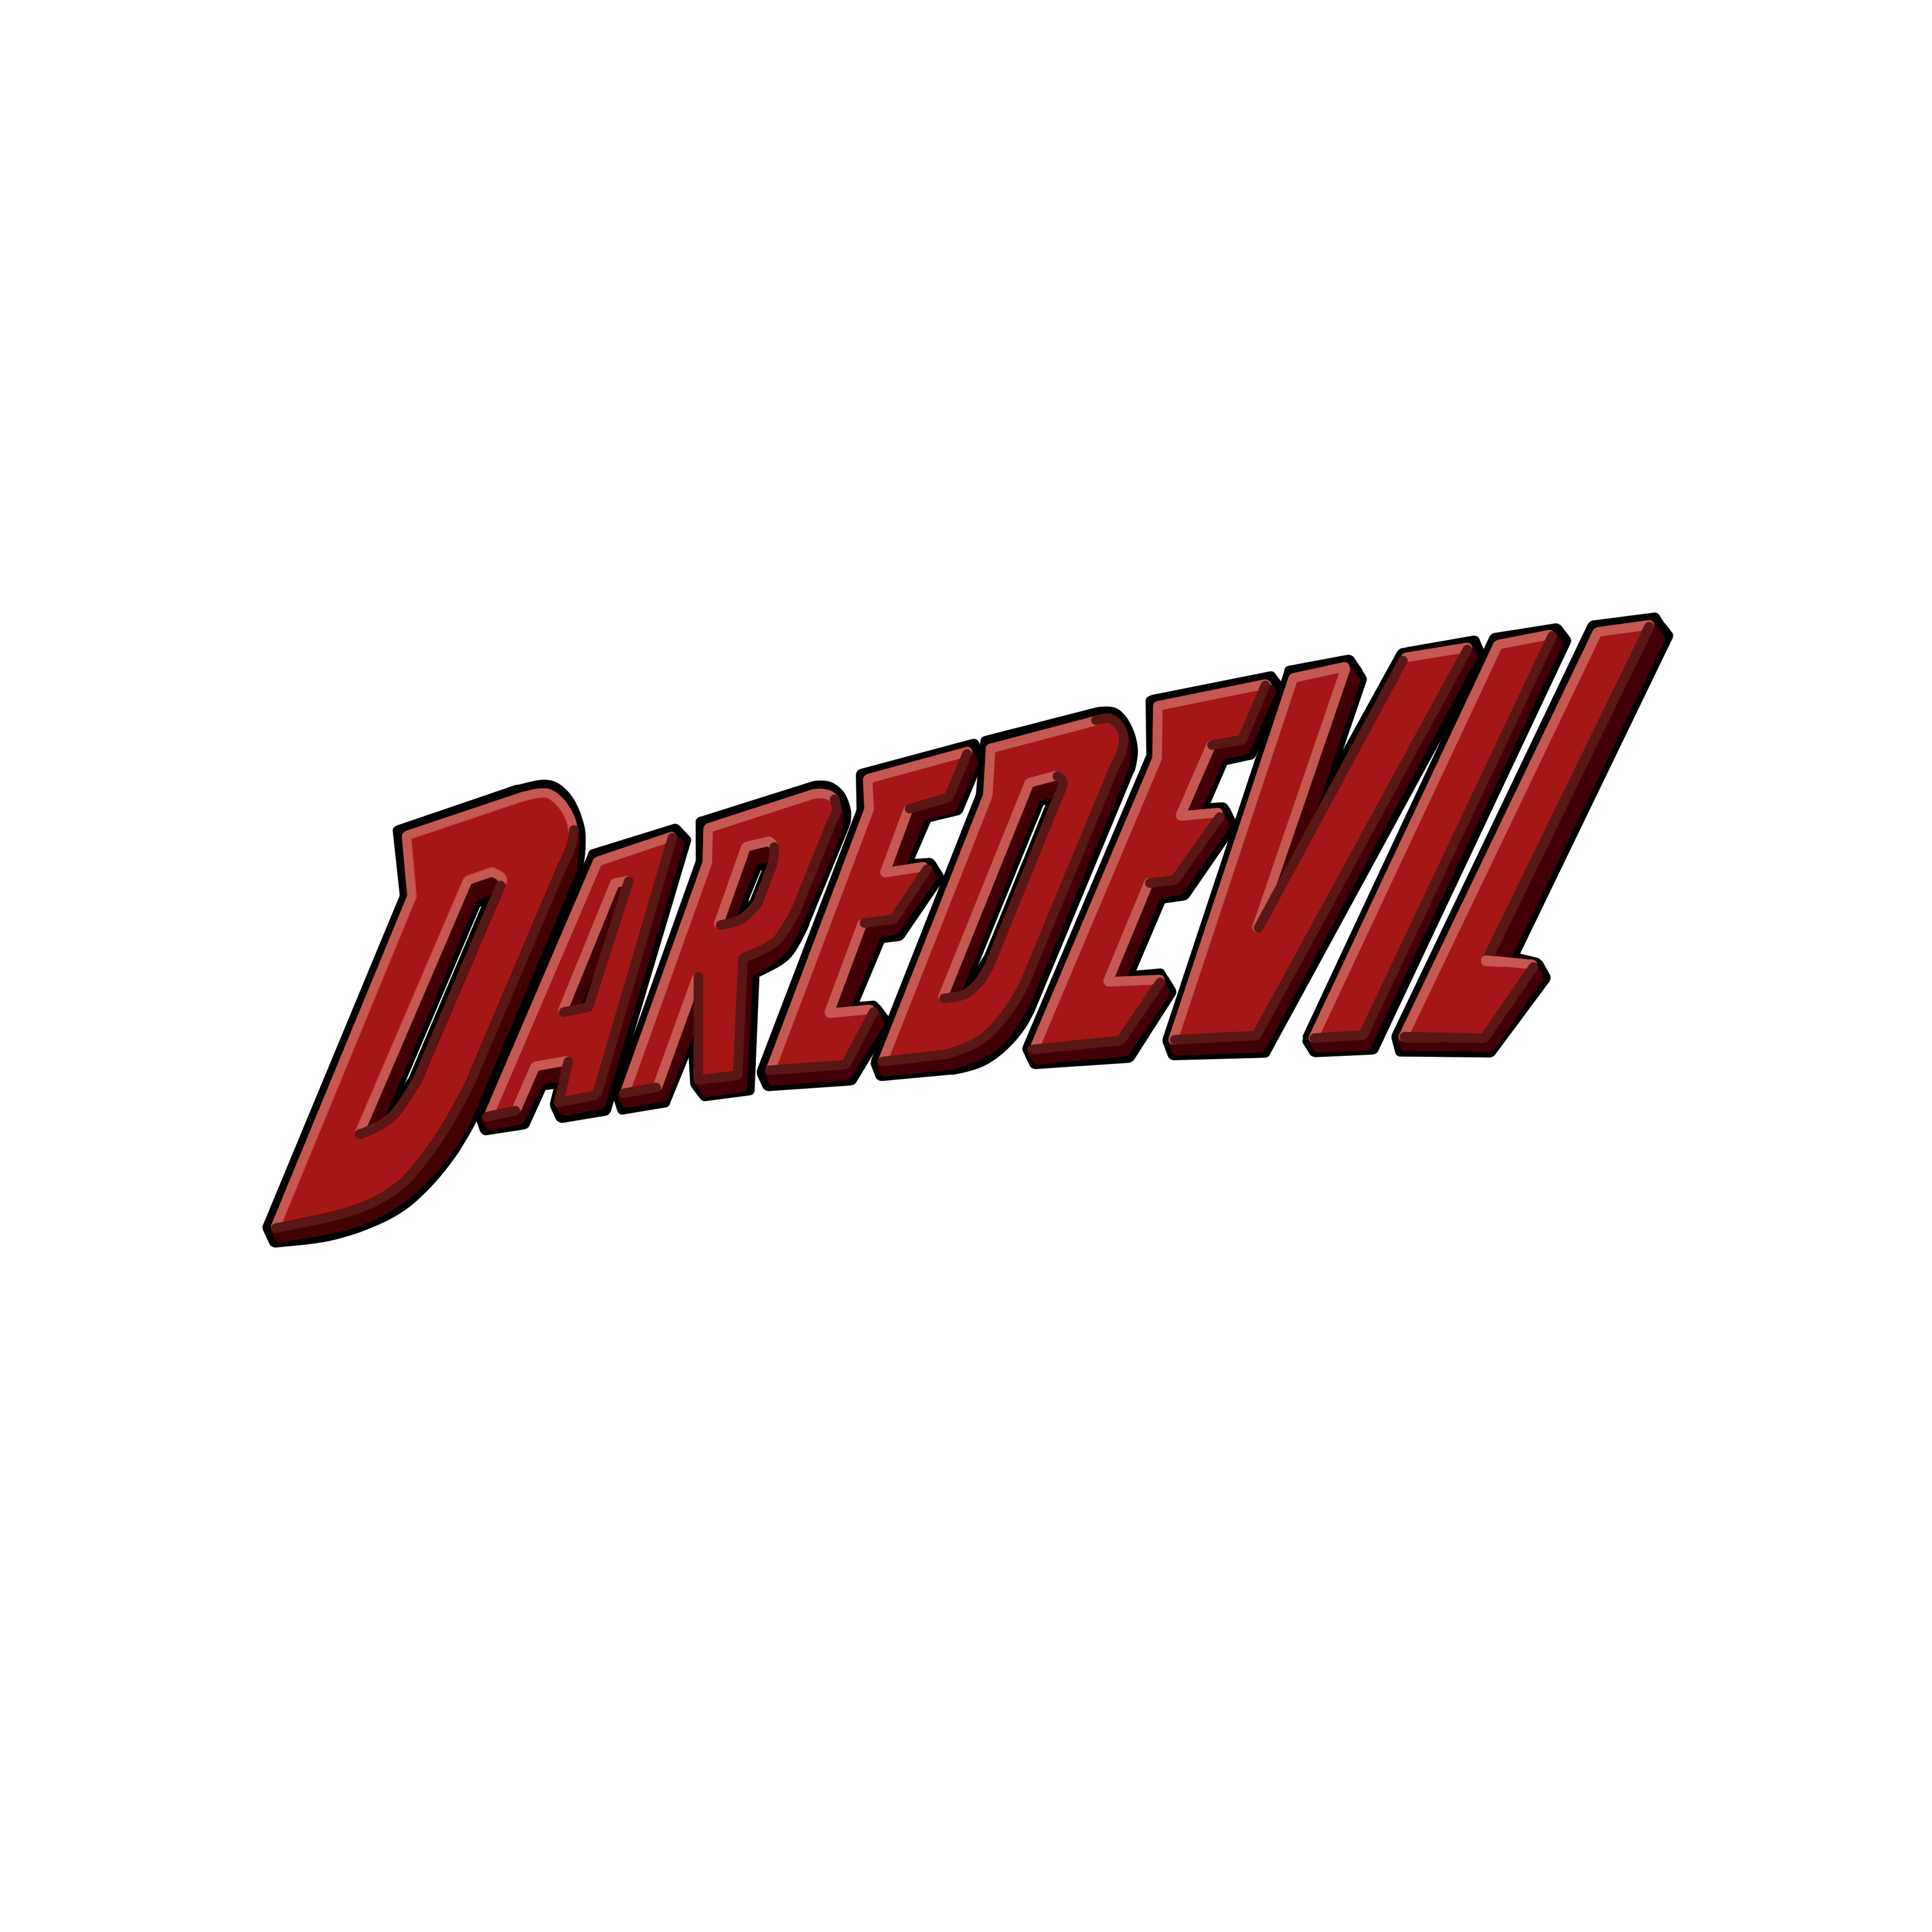 Netflix Text Brand Daredevil Nelson Foggy PNG Image